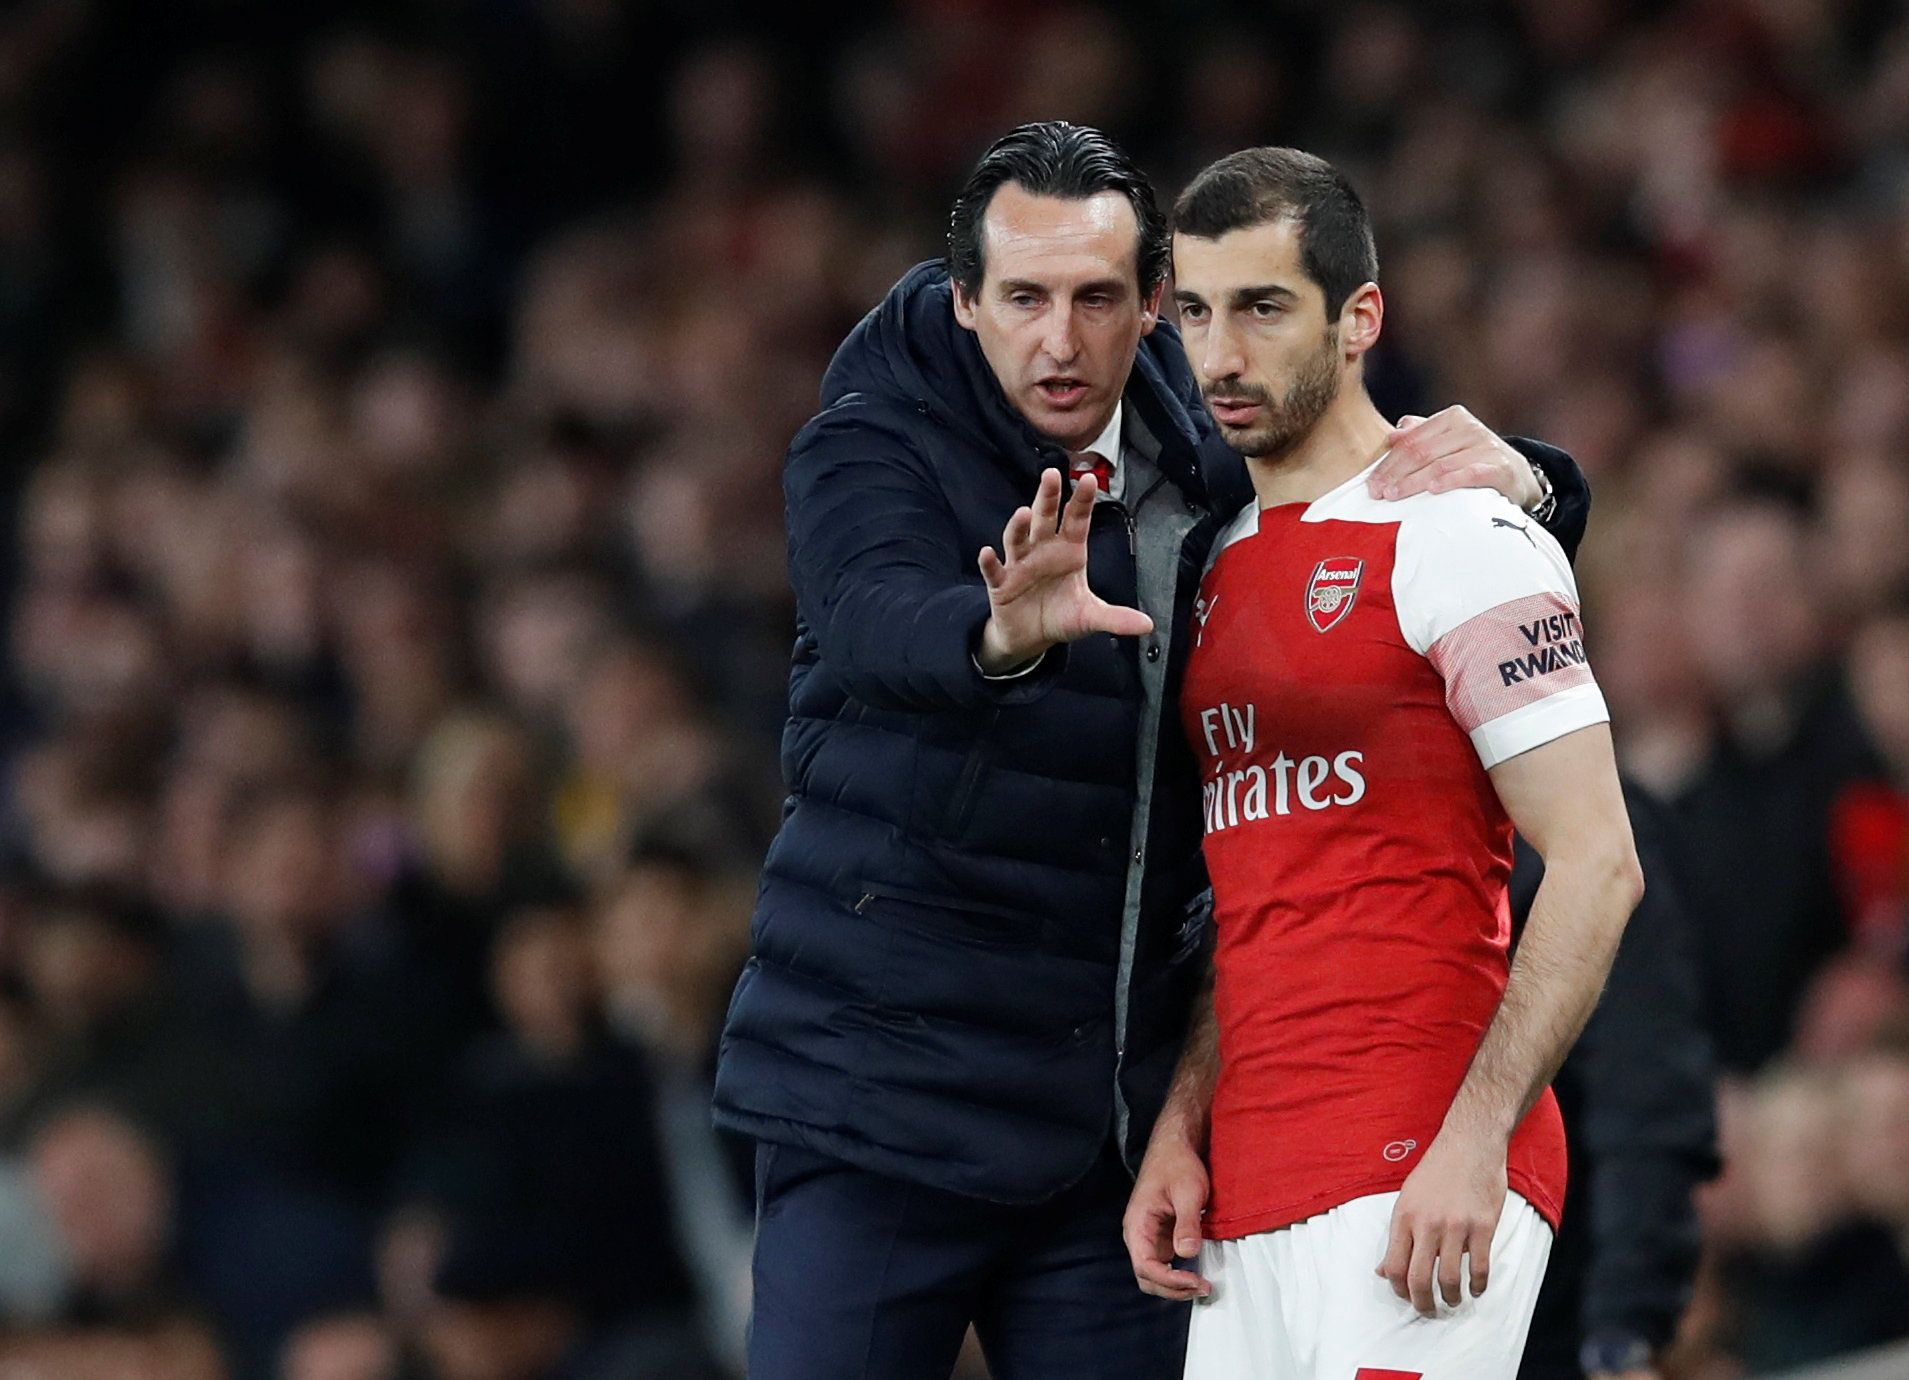 Soccer Football - Premier League - Arsenal v Newcastle United - Emirates Stadium, London, Britain - April 1, 2019  Arsenal manager Unai Emery speaks to Henrikh Mkhitaryan   REUTERS/David Klein  EDITORIAL USE ONLY. No use with unauthorized audio, video, data, fixture lists, club/league logos or 